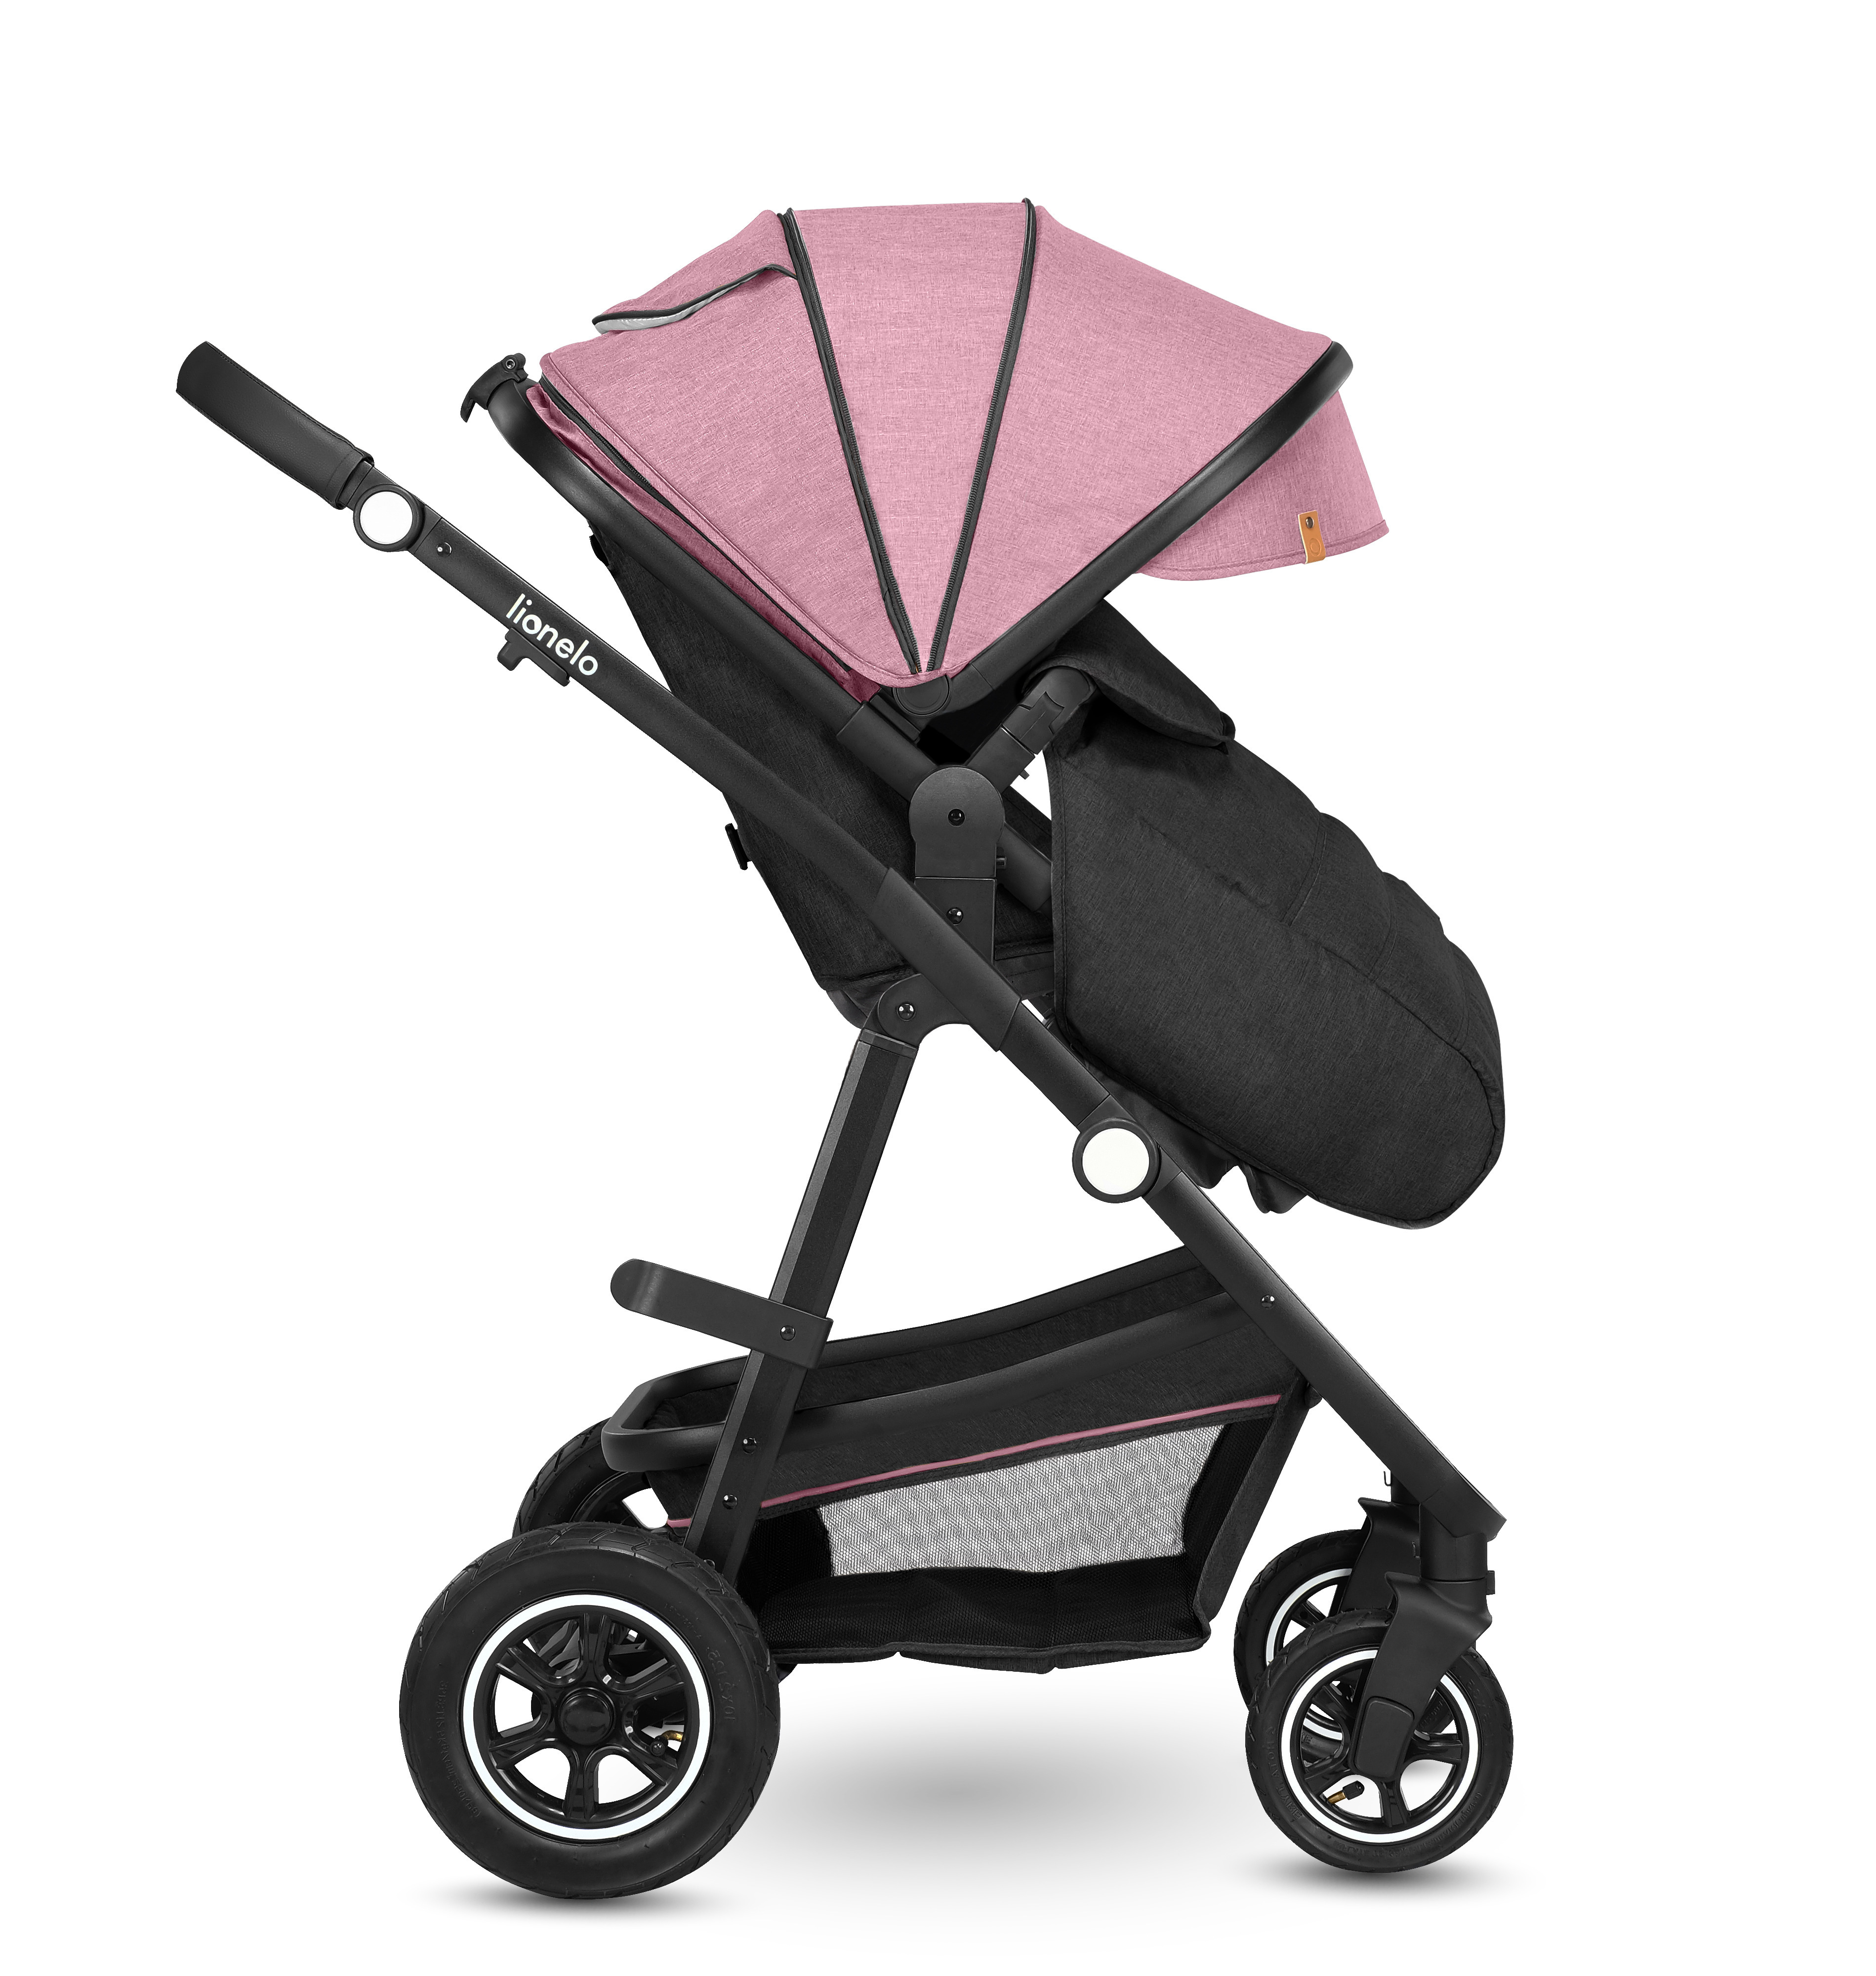 Lionelo Amber 2 in 1 Pink Rose - carucior multifunctional 2 in 1